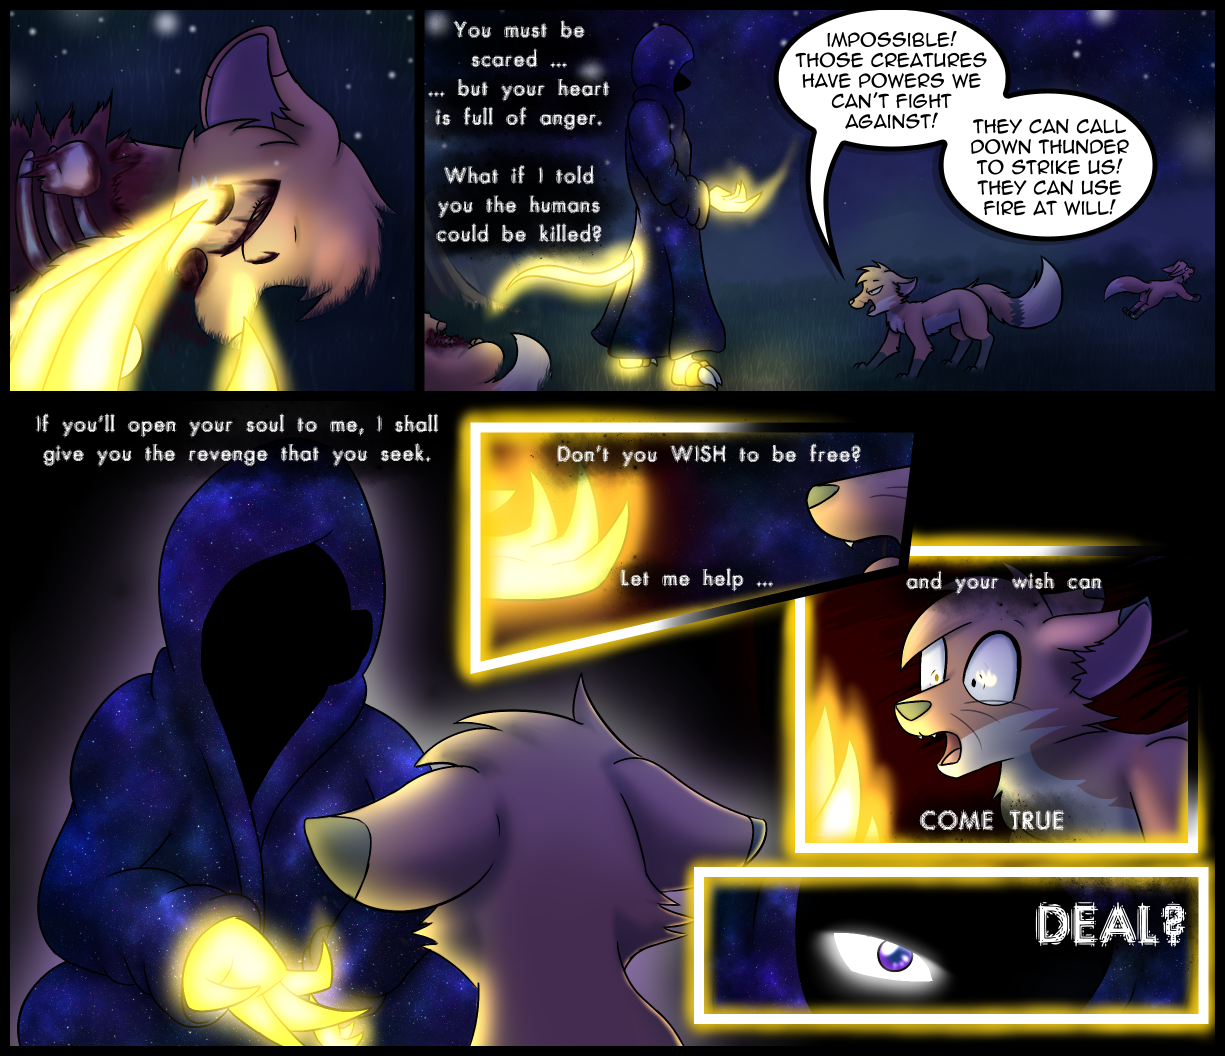 Ch2 Remastered Page 16 – A Deal